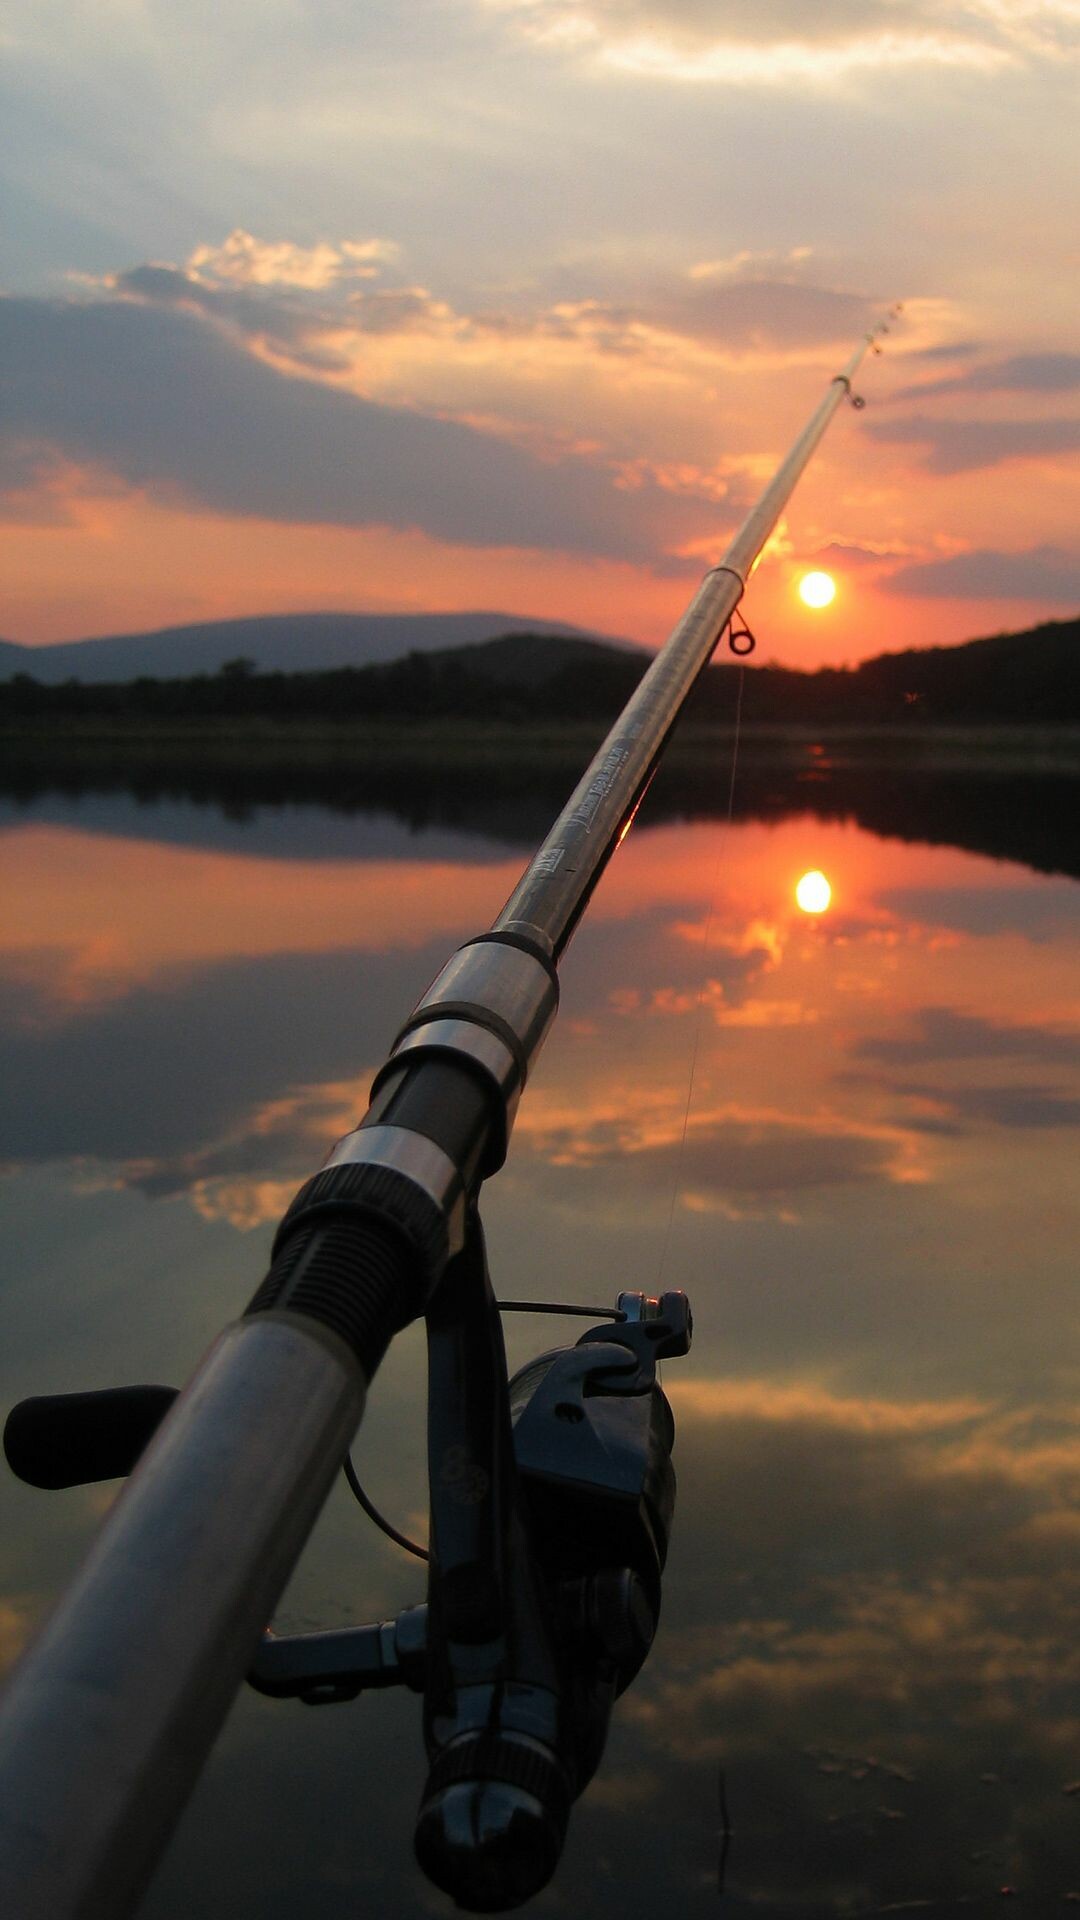 Fishing rod, Equipment for angling, Outdoor sports, Fishing gear, 1080x1920 Full HD Phone